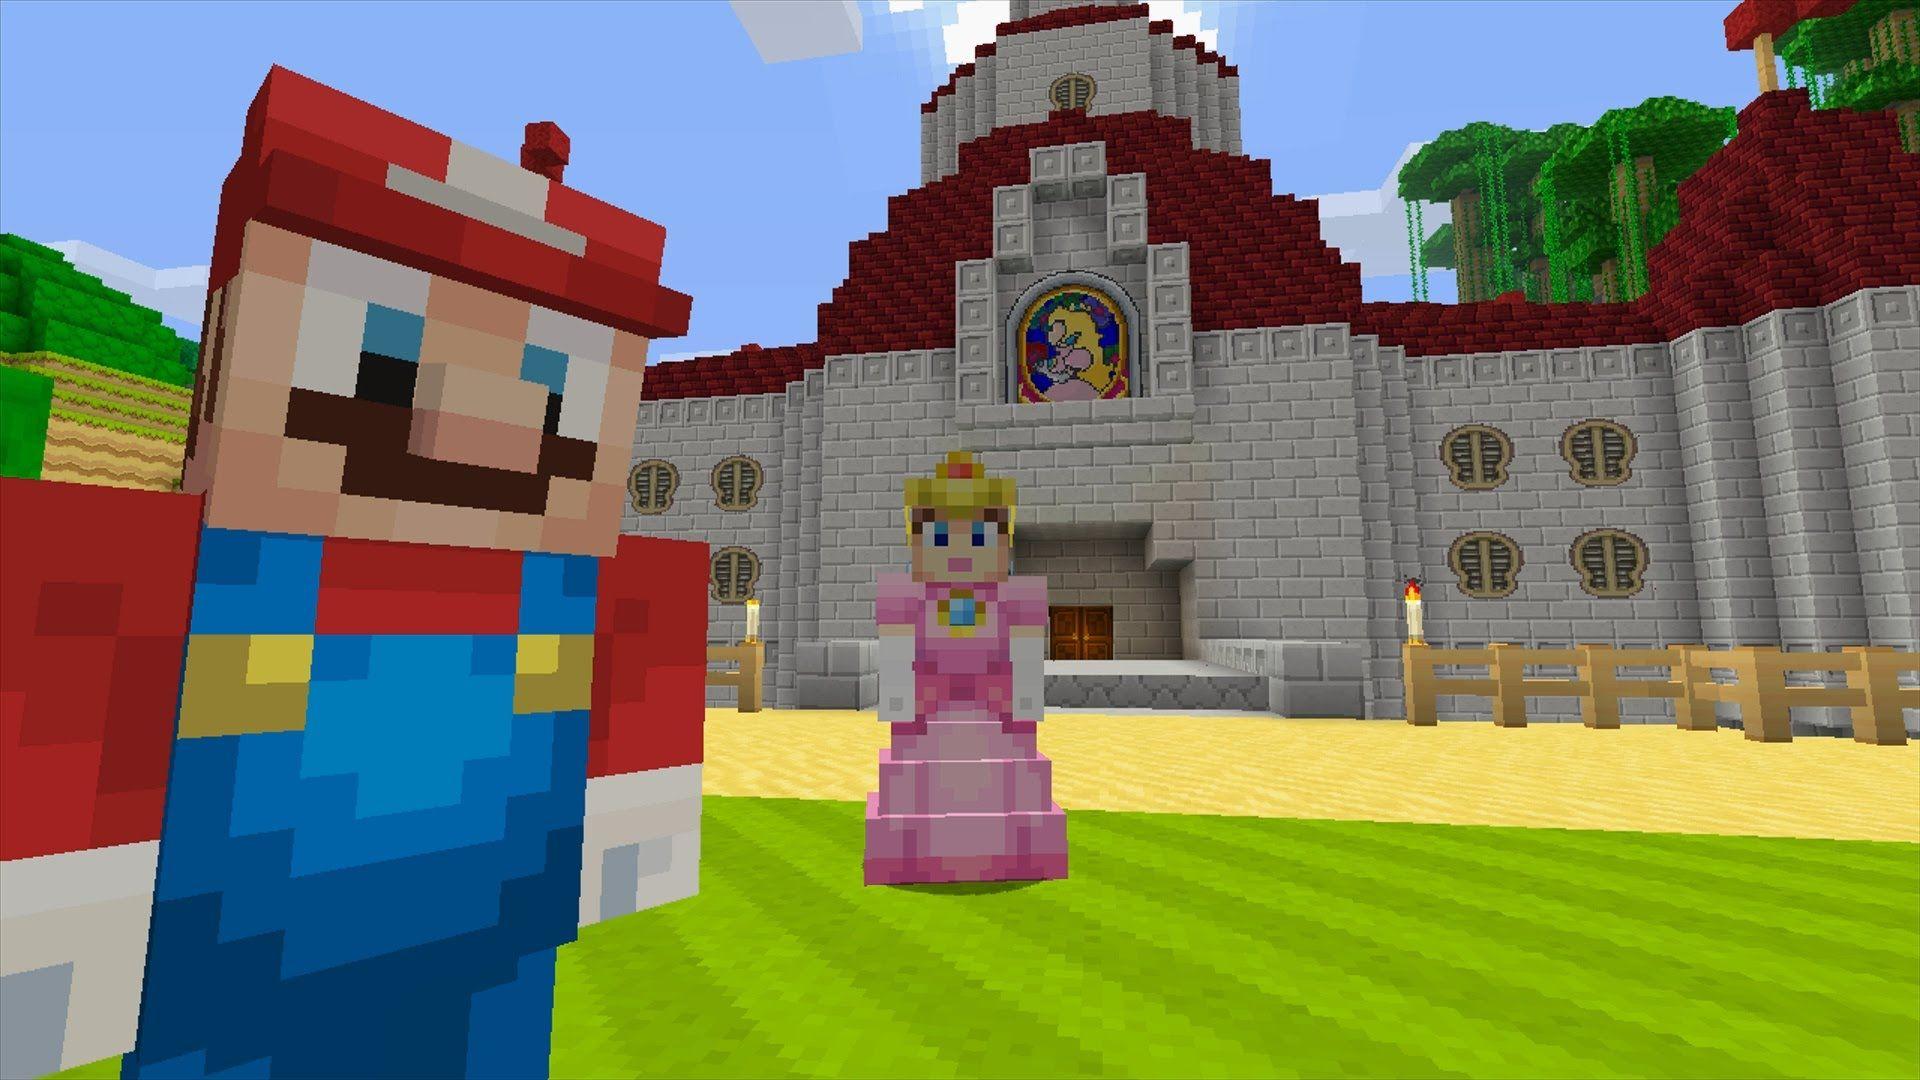 Microsoft's Minecraft Set to Launch on the Nintendo Switch Next Month